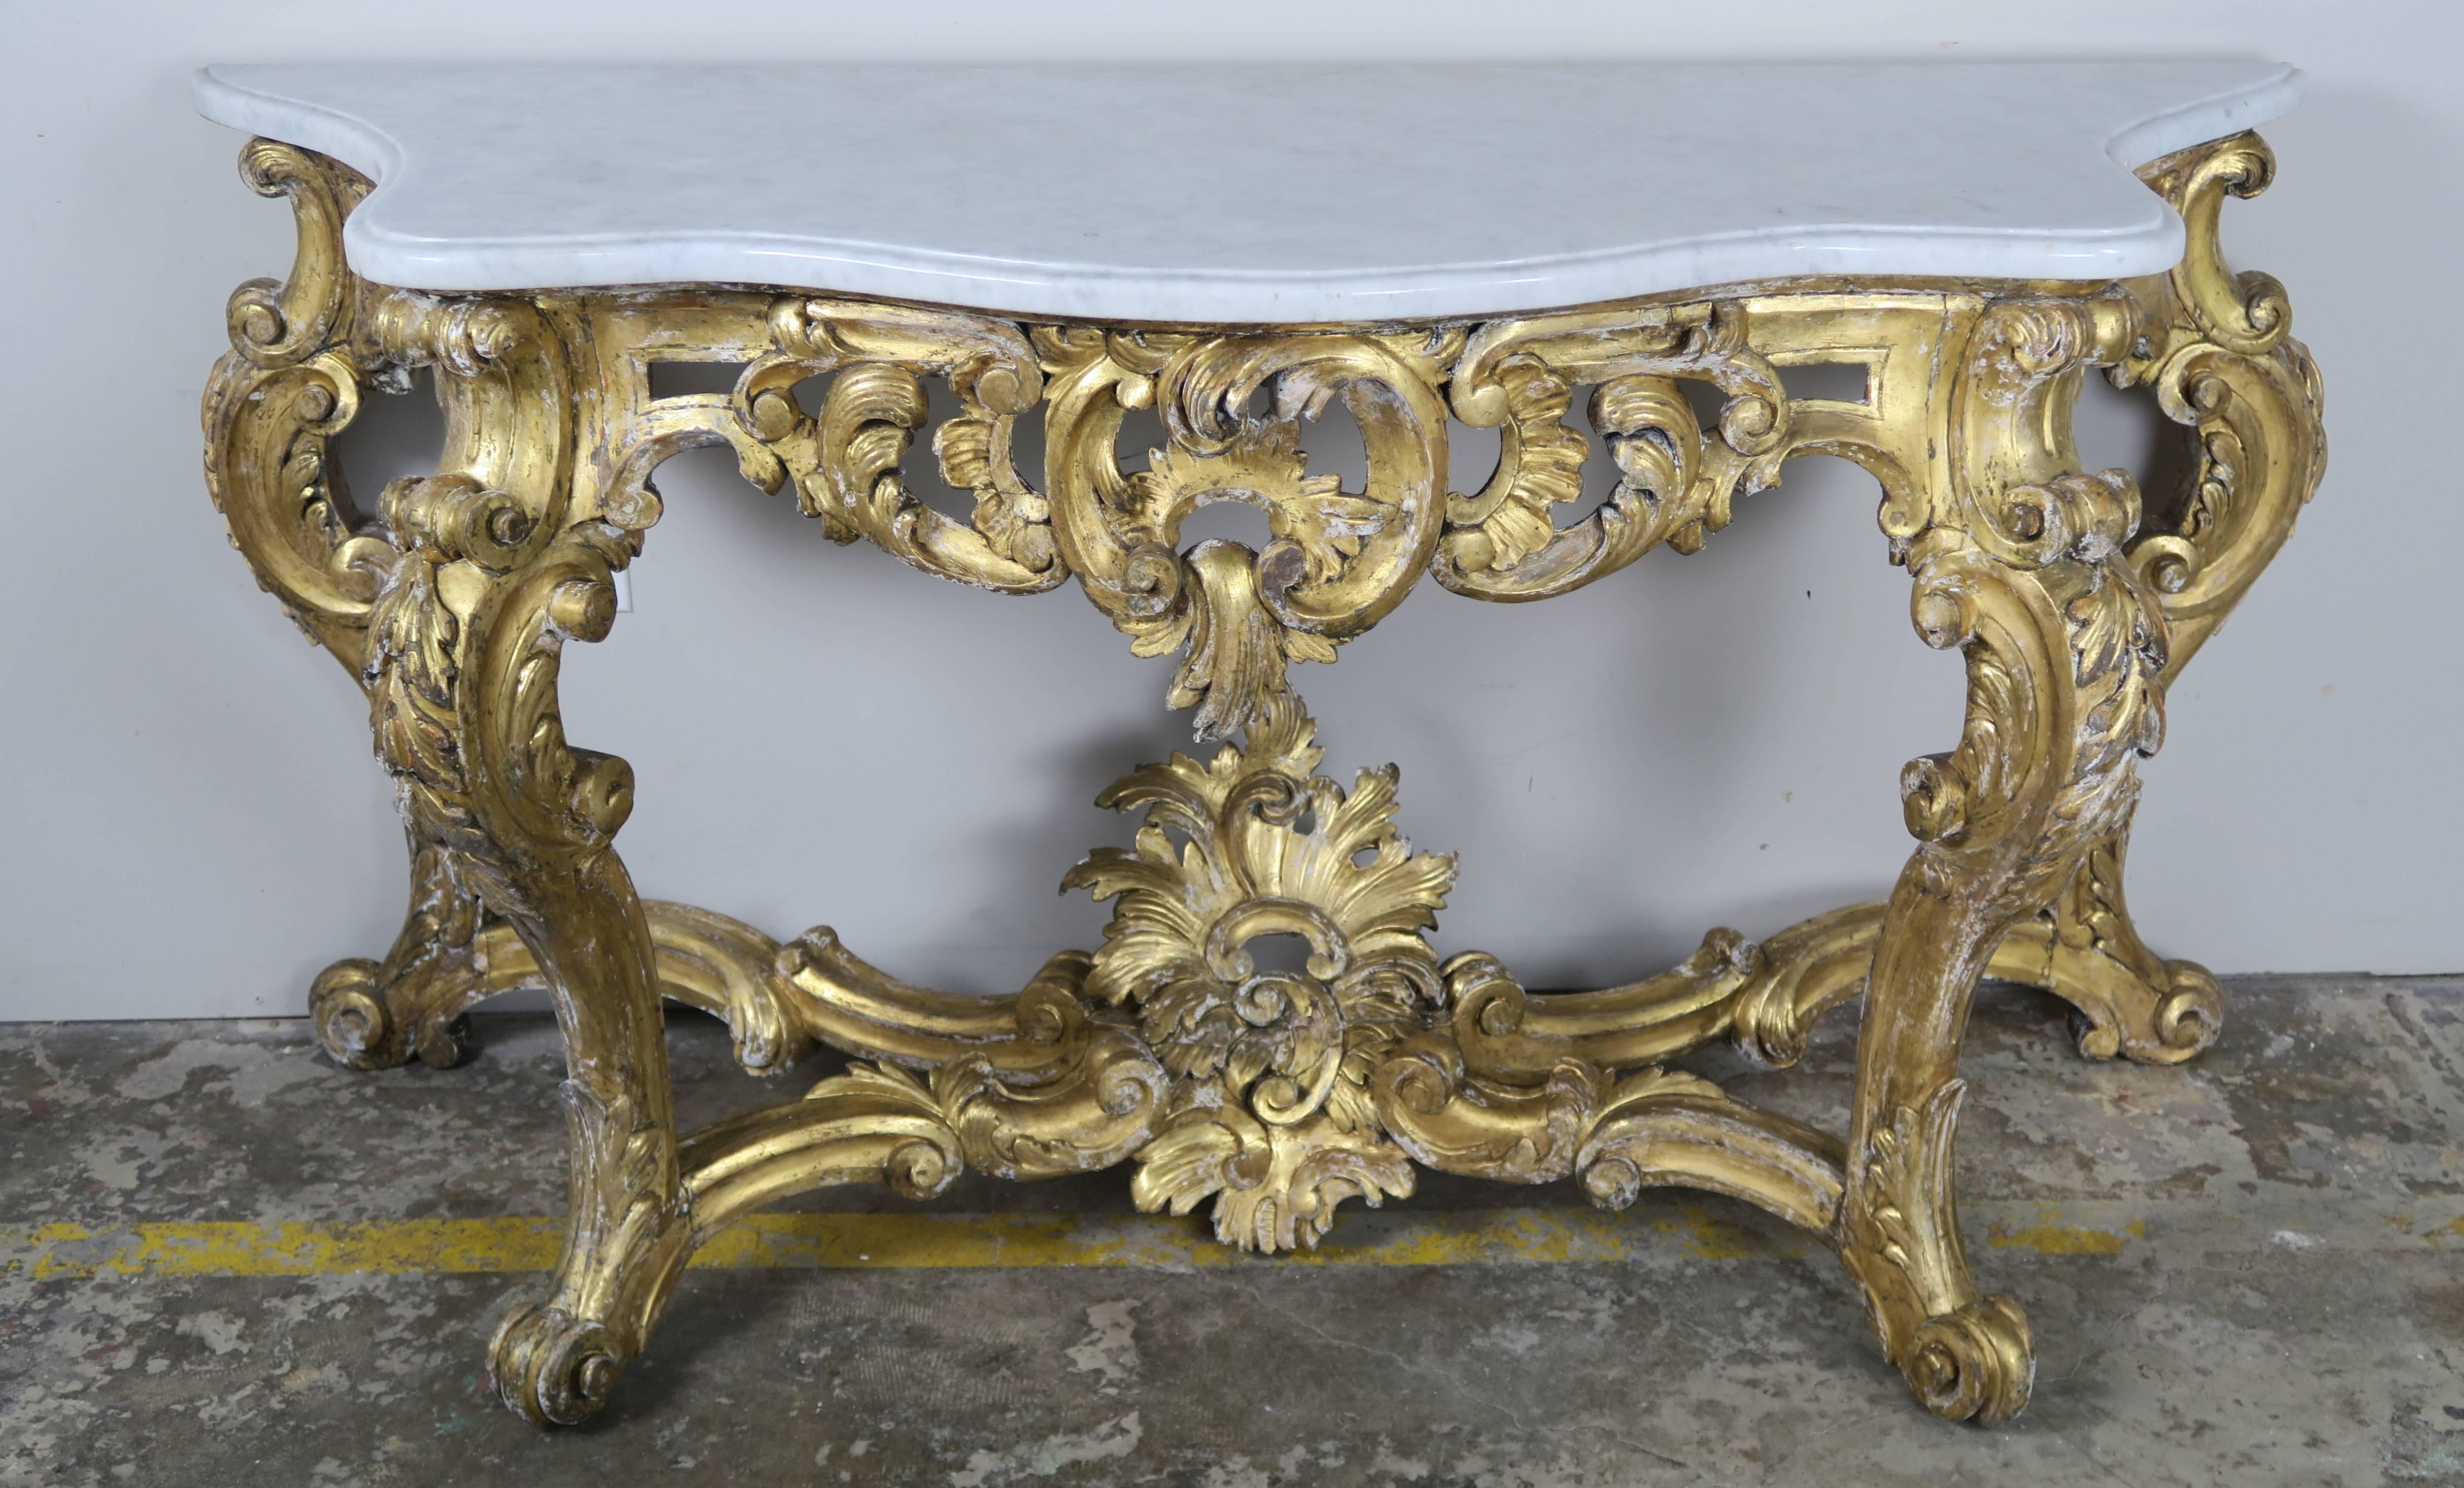 19th century French Louis XV Rococo style serpentine shaped giltwood carved console with original Carrara marble top. The console stands on four scrolled cabriole legs ending in ram's head feet. A bottom stretcher attaches the four legs to a centre